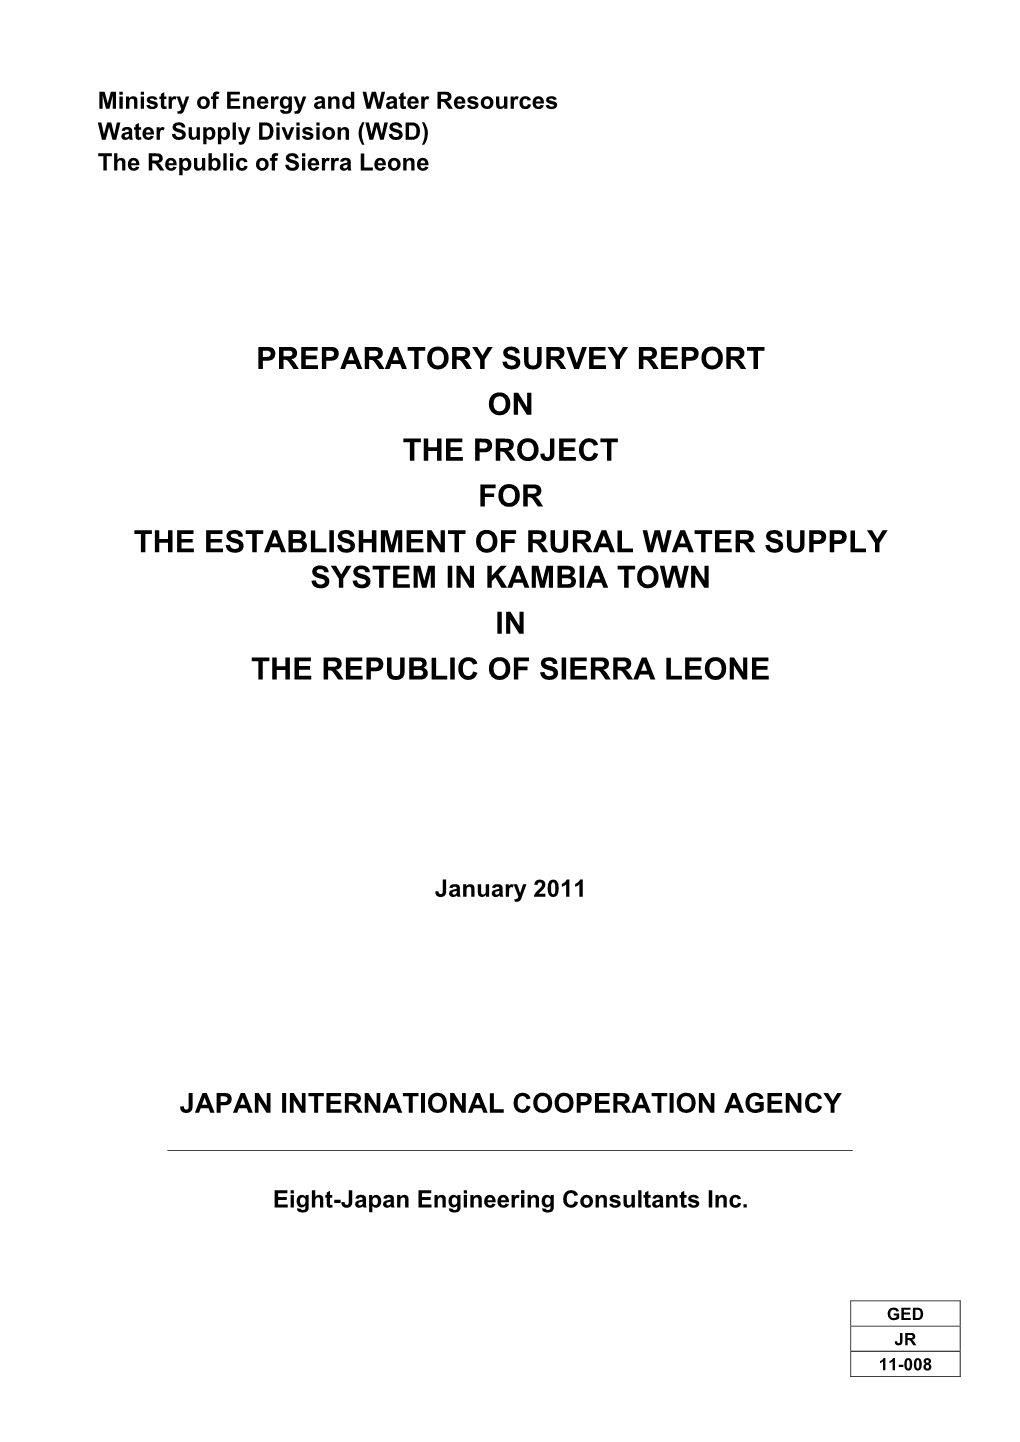 Preparatory Survey Report on the Project for the Establishment of Rural Water Supply System in Kambia Town in the Republic of Sierra Leone